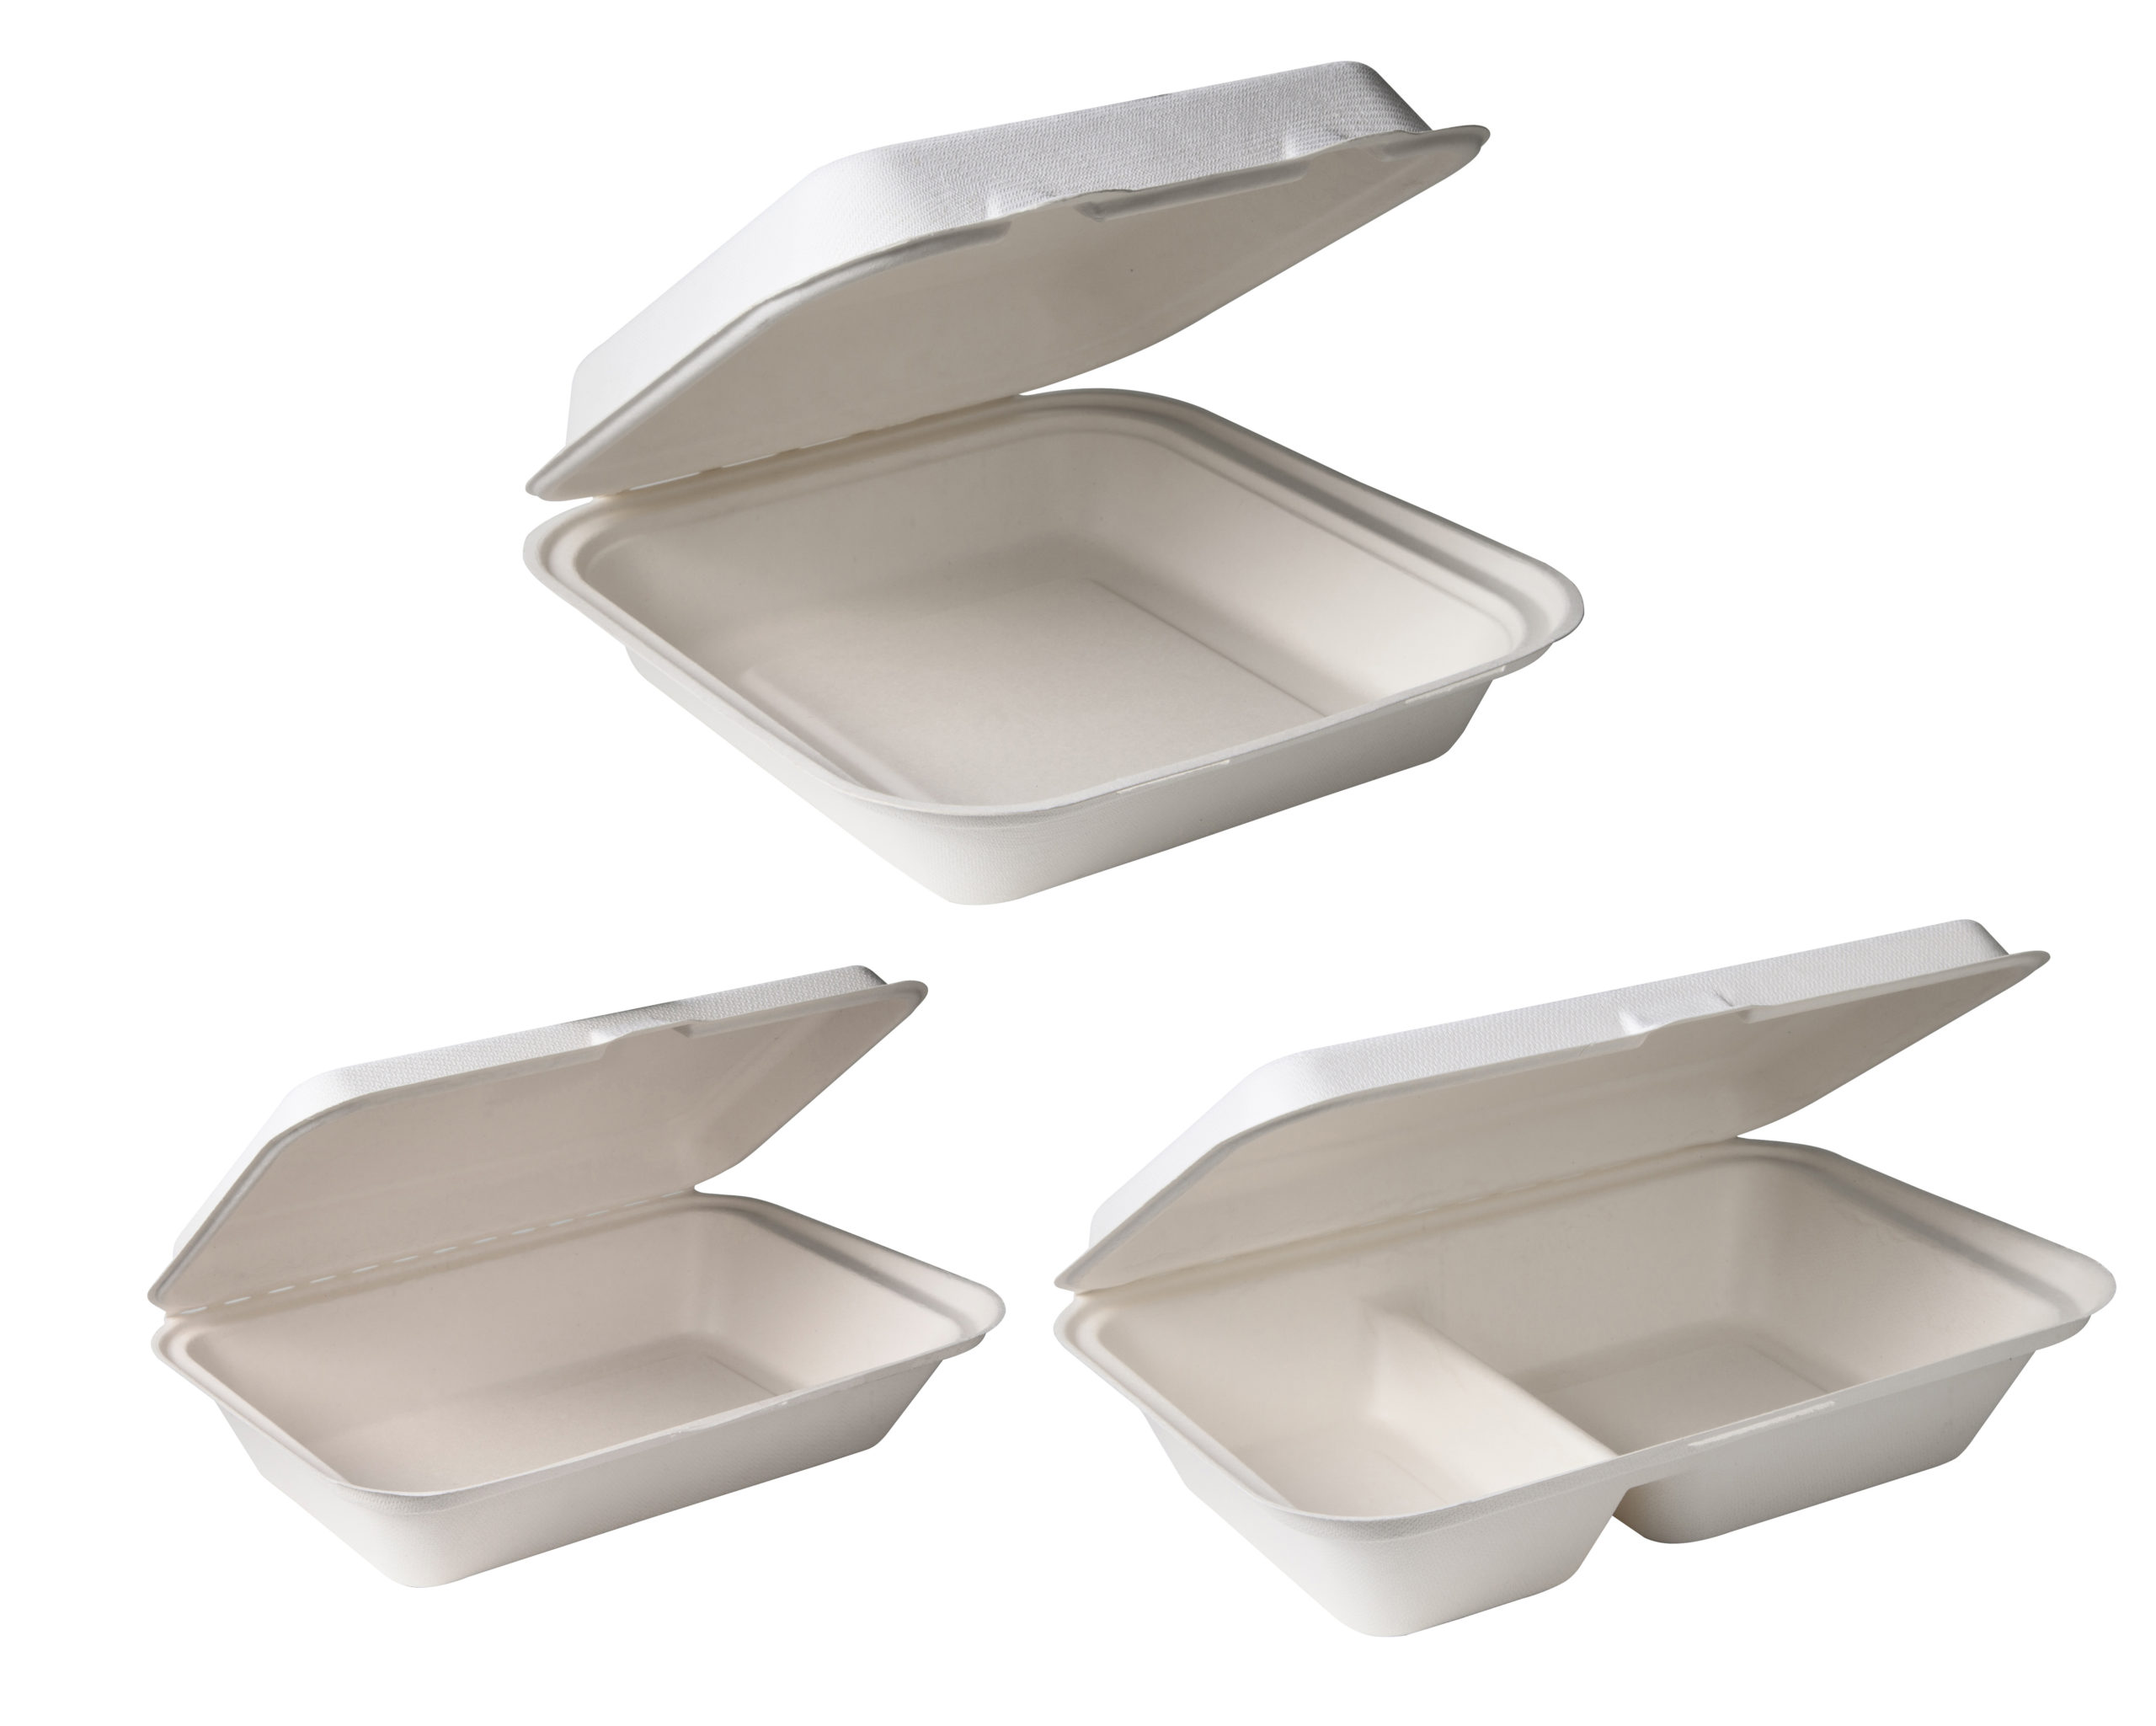 Disposable Plastic Container Biodegradable Eco-Friendly Clamshell